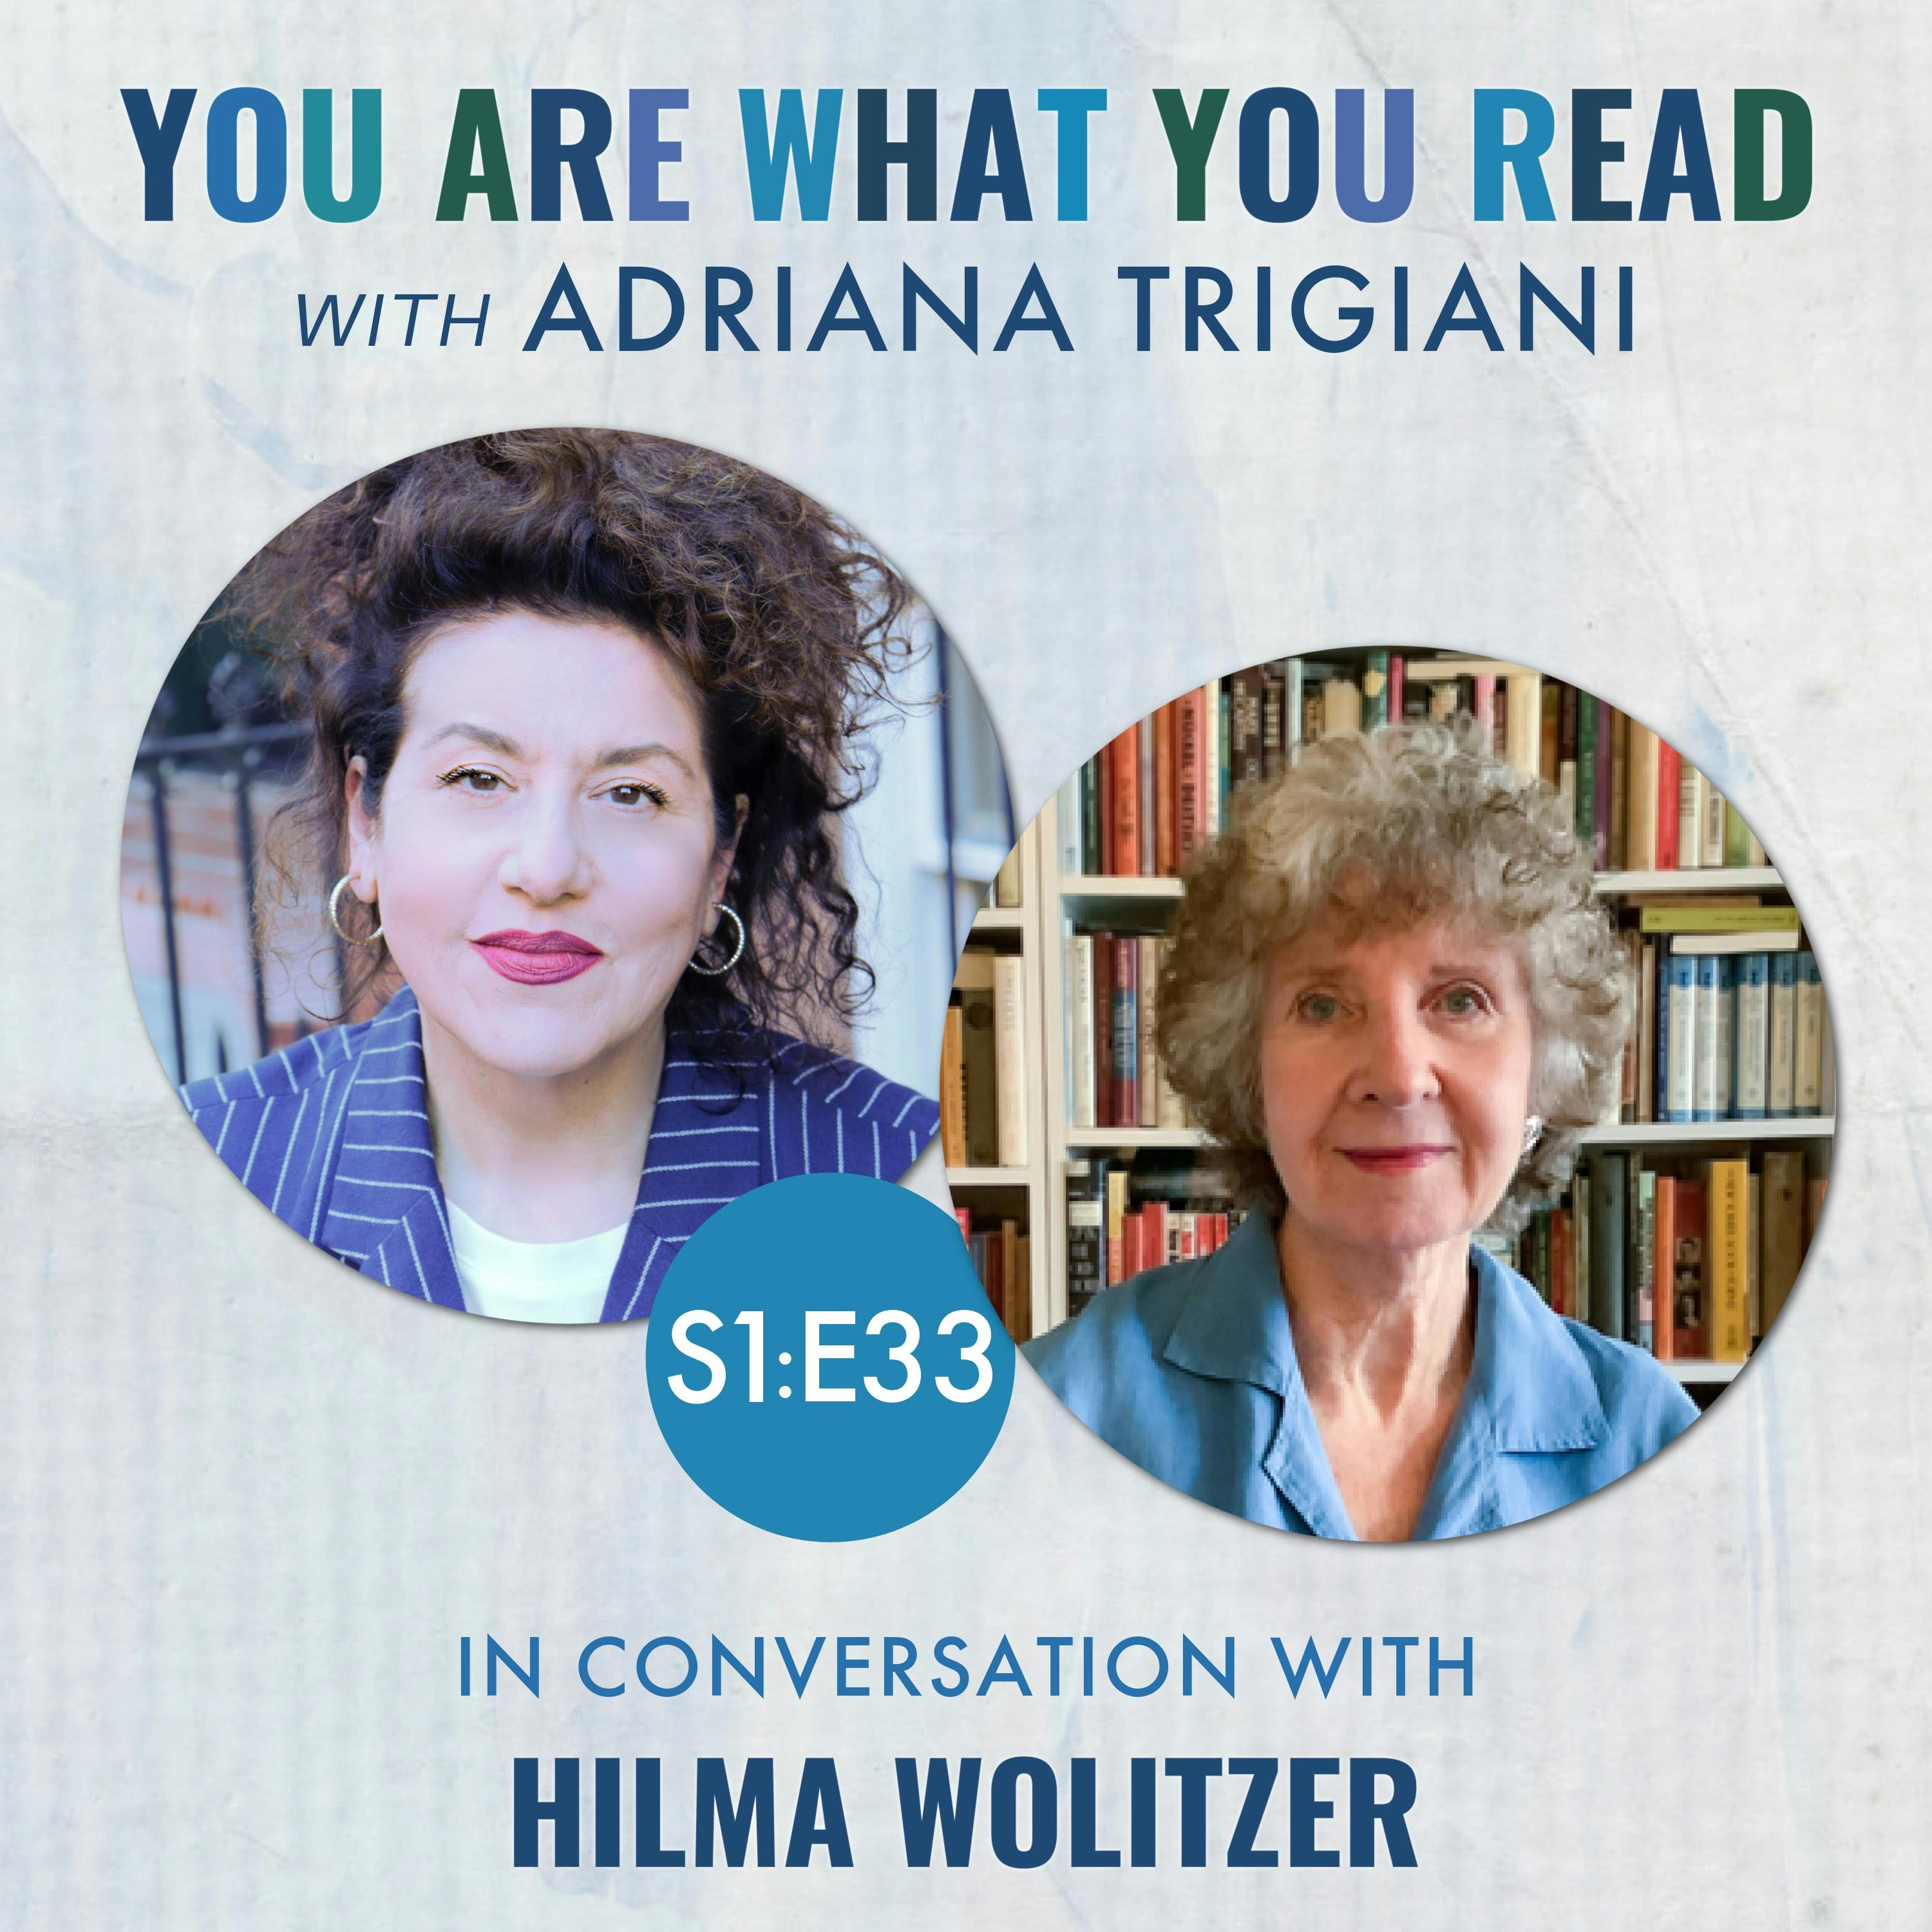 Today A Woman Went Mad in the Supermarket: Hilma Wolitzer, A Writer in Full